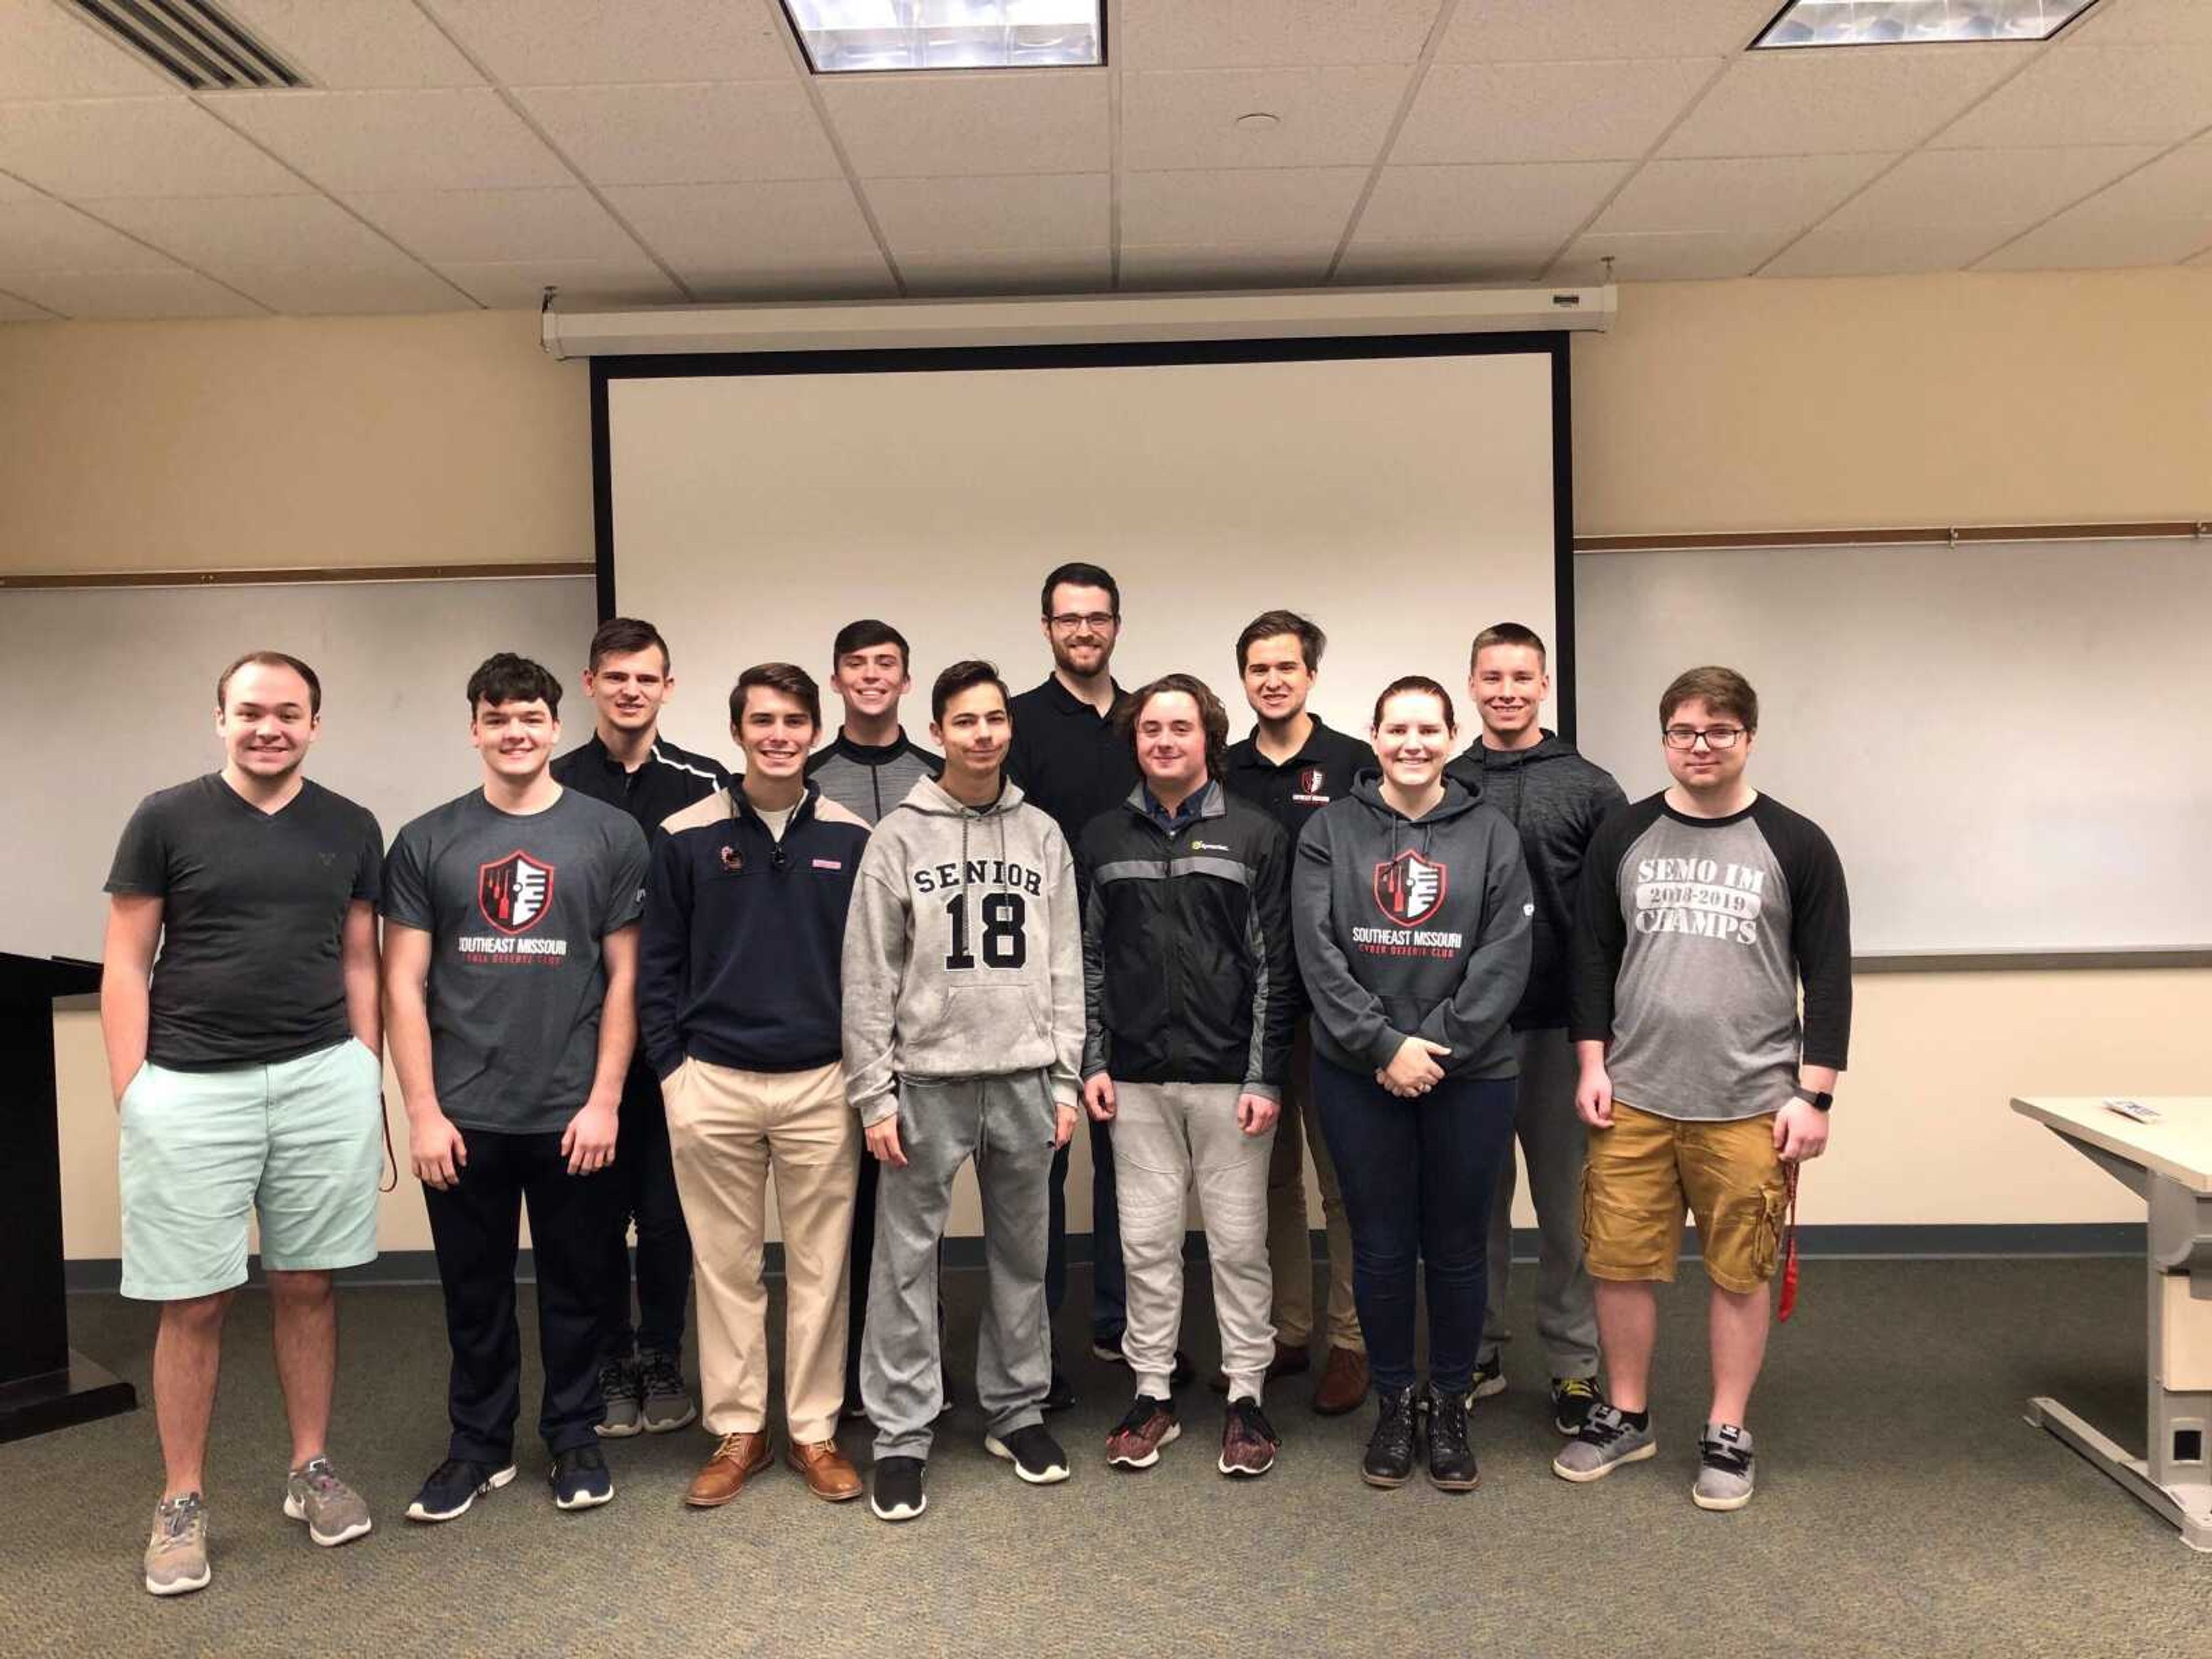 Undefeated at Collegiate Competition; Cyber Defense Club wins first place